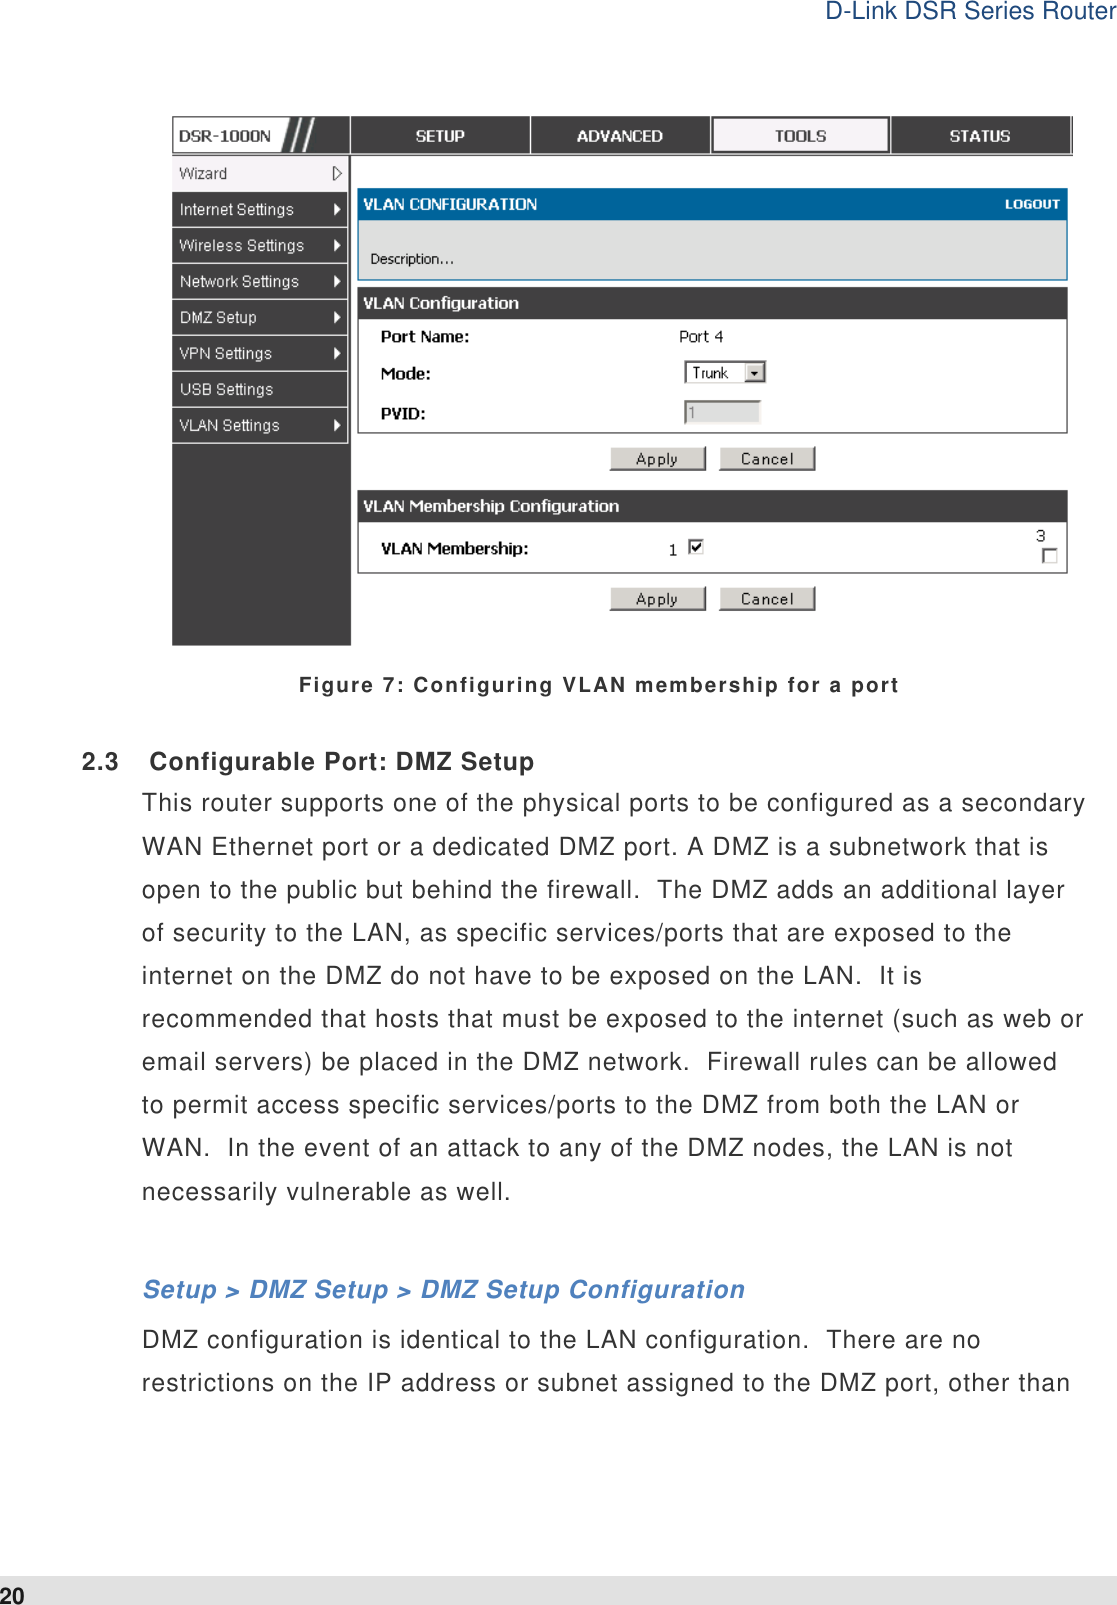 D-Link DSR Series Router 20  Figure 7: Configuring VLAN membership for a port 2.3  Configurable Port: DMZ Setup This router supports one of the physical ports to be configured as a secondary WAN Ethernet port or a dedicated DMZ port. A DMZ is a subnetwork that is open to the public but behind the firewall.  The DMZ adds an additional layer of security to the LAN, as specific services/ports that are exposed to the internet on the DMZ do not have to be exposed on the LAN.  It is recommended that hosts that must be exposed to the internet (such as web or email servers) be placed in the DMZ network.  Firewall rules can be allowed to permit access specific services/ports to the DMZ from both the LAN or WAN.  In the event of an attack to any of the DMZ nodes, the LAN is not necessarily vulnerable as well.    Setup &gt; DMZ Setup &gt; DMZ Setup Configuration DMZ configuration is identical to the LAN configuration.  There are no restrictions on the IP address or subnet assigned to the DMZ port, other than 